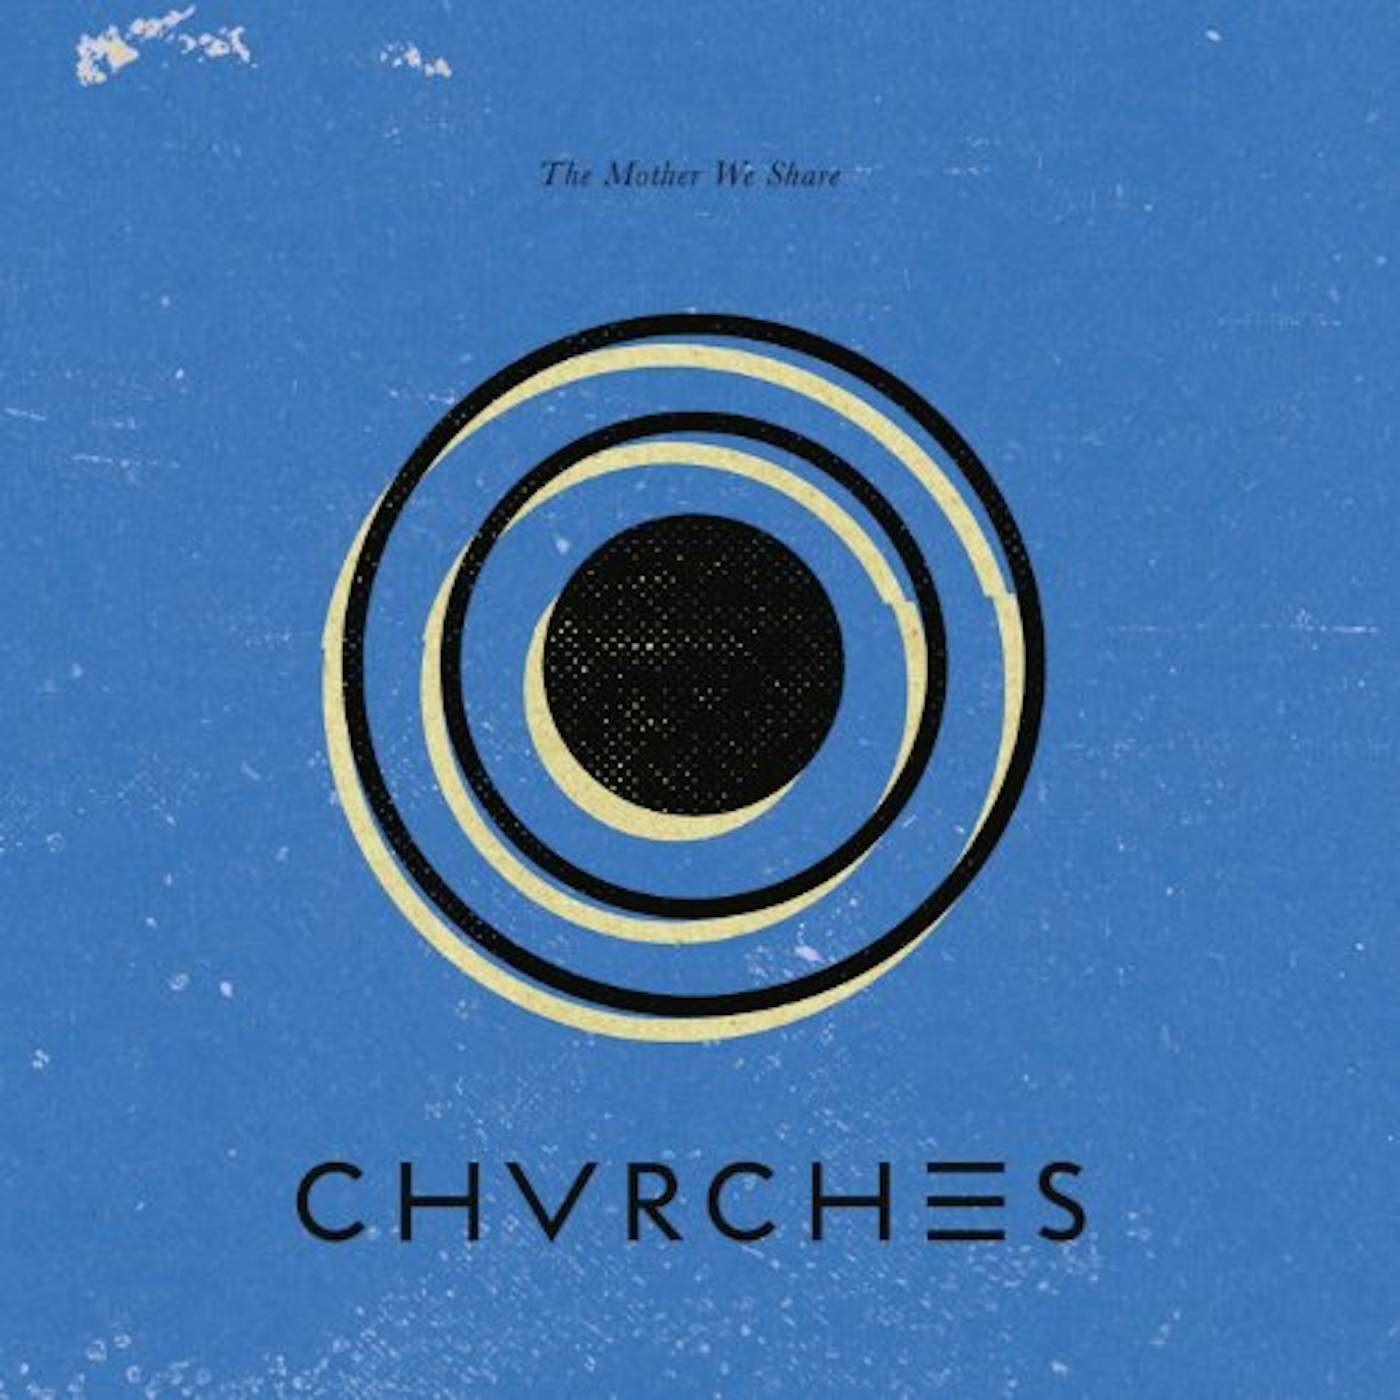 CHVRCHES MOTHER WE SHARE Vinyl Record